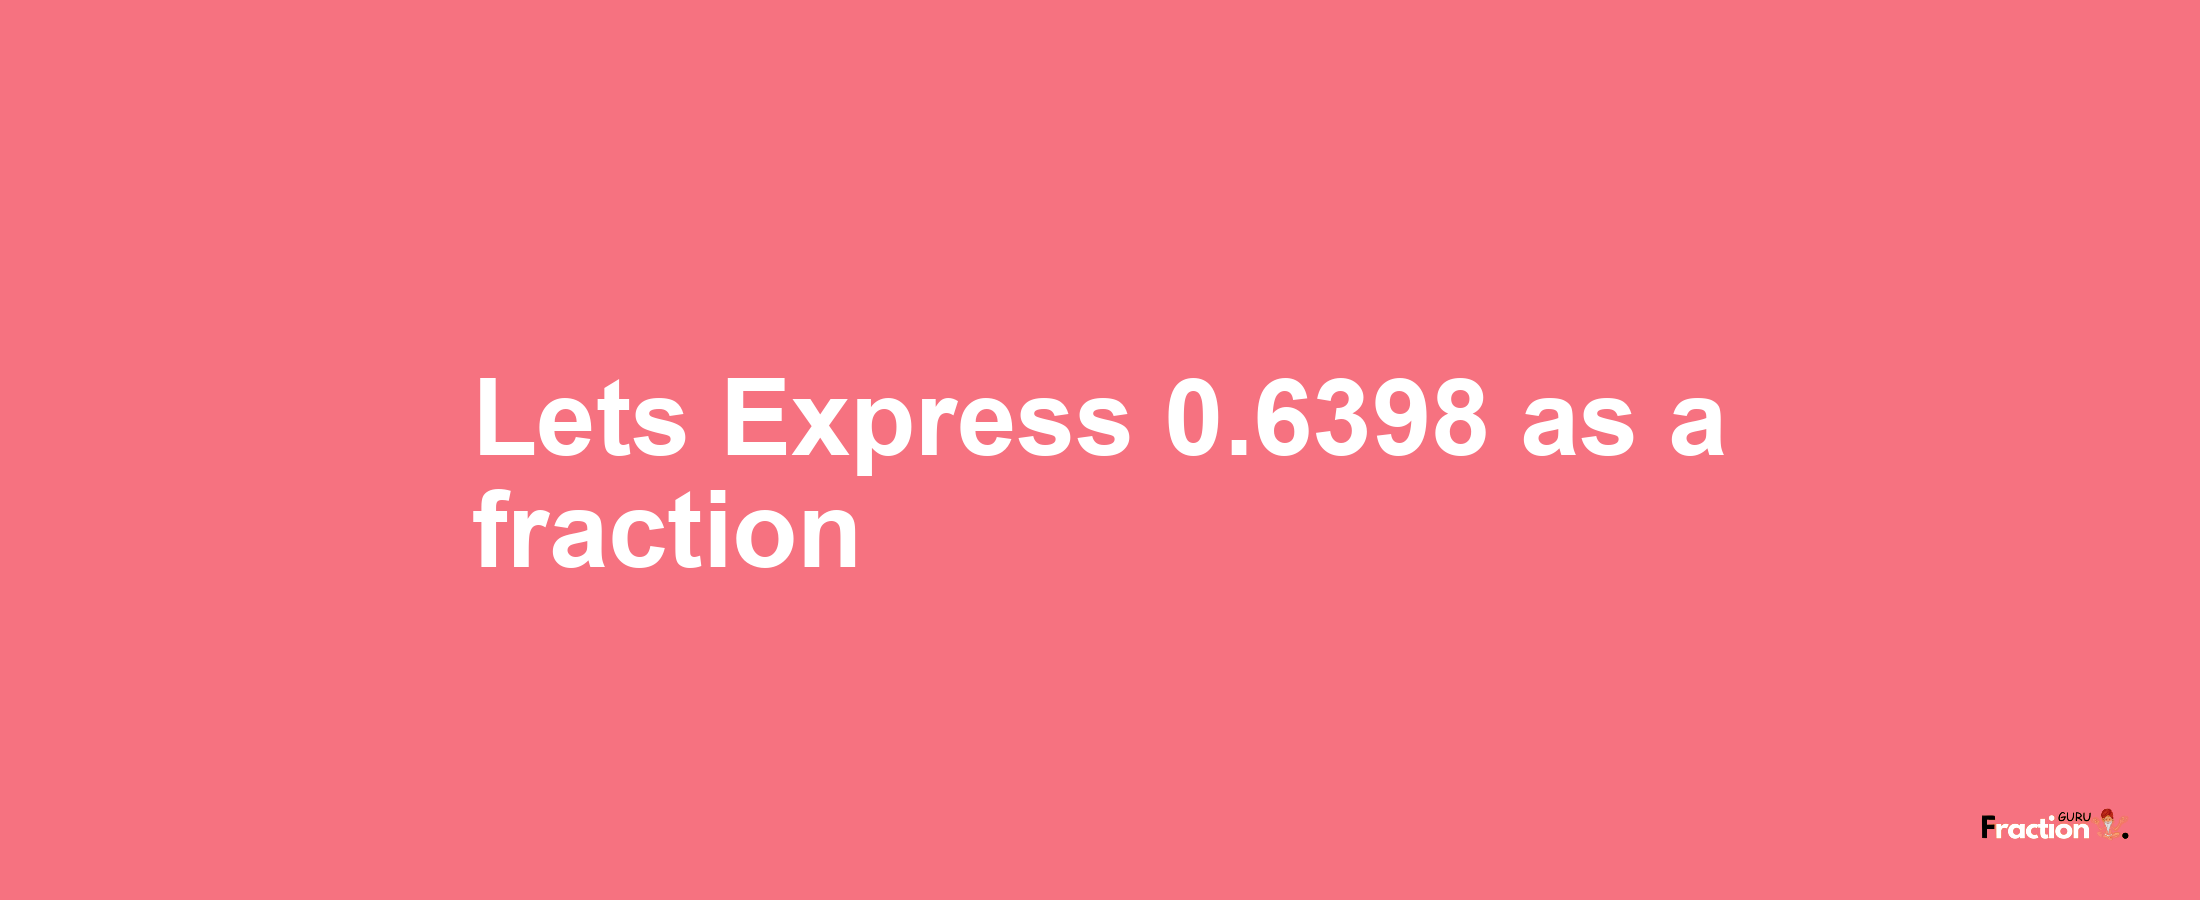 Lets Express 0.6398 as afraction